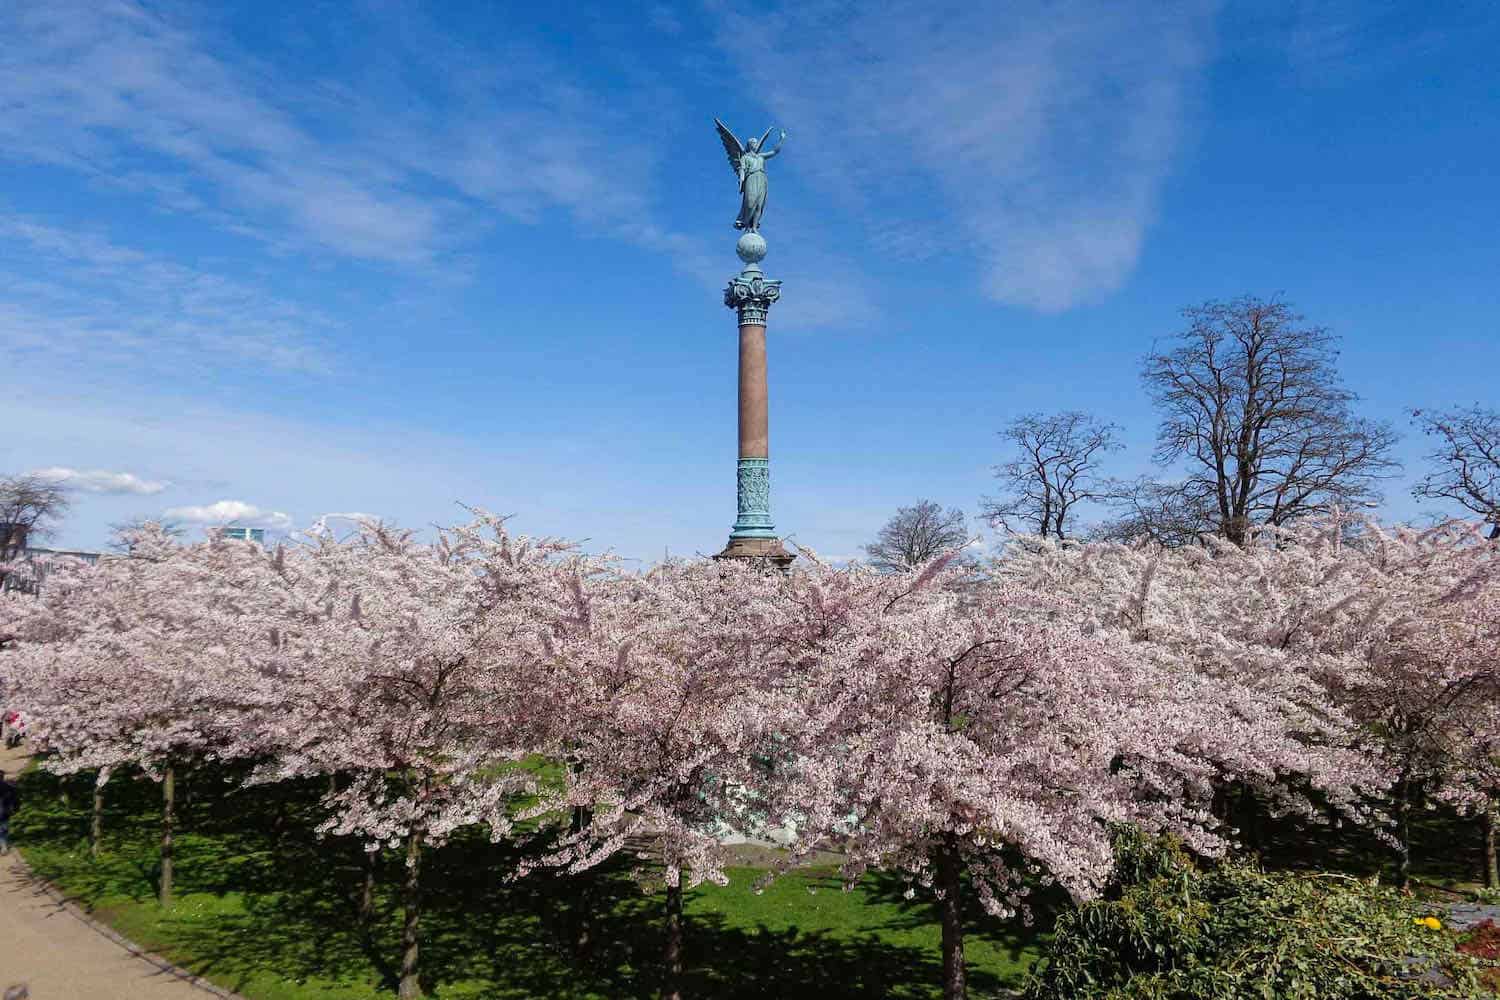 tall statue surrounded by pink cherry blossoms in Copenhagen, Denmark.